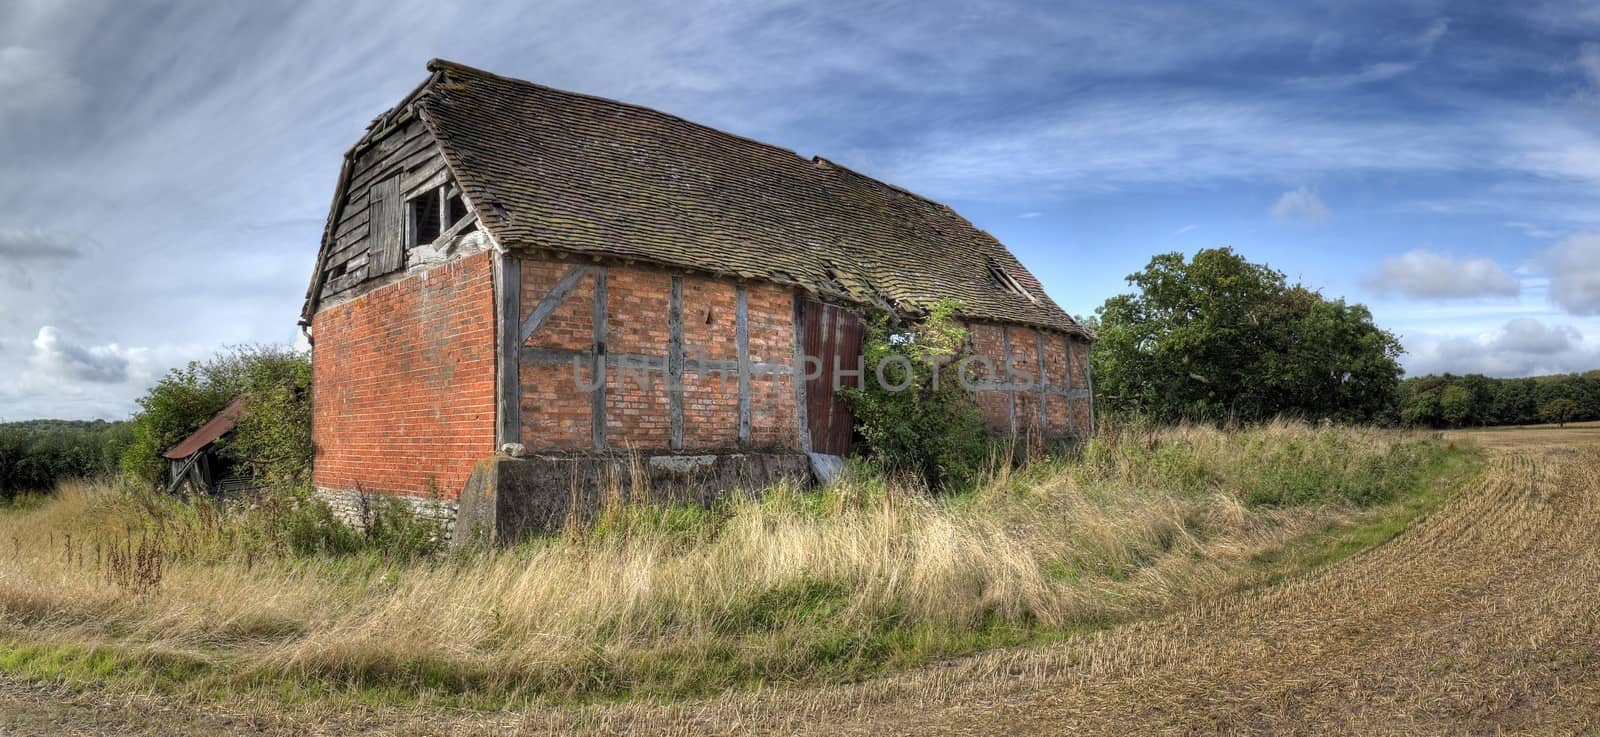 Ruined barn, England by andrewroland